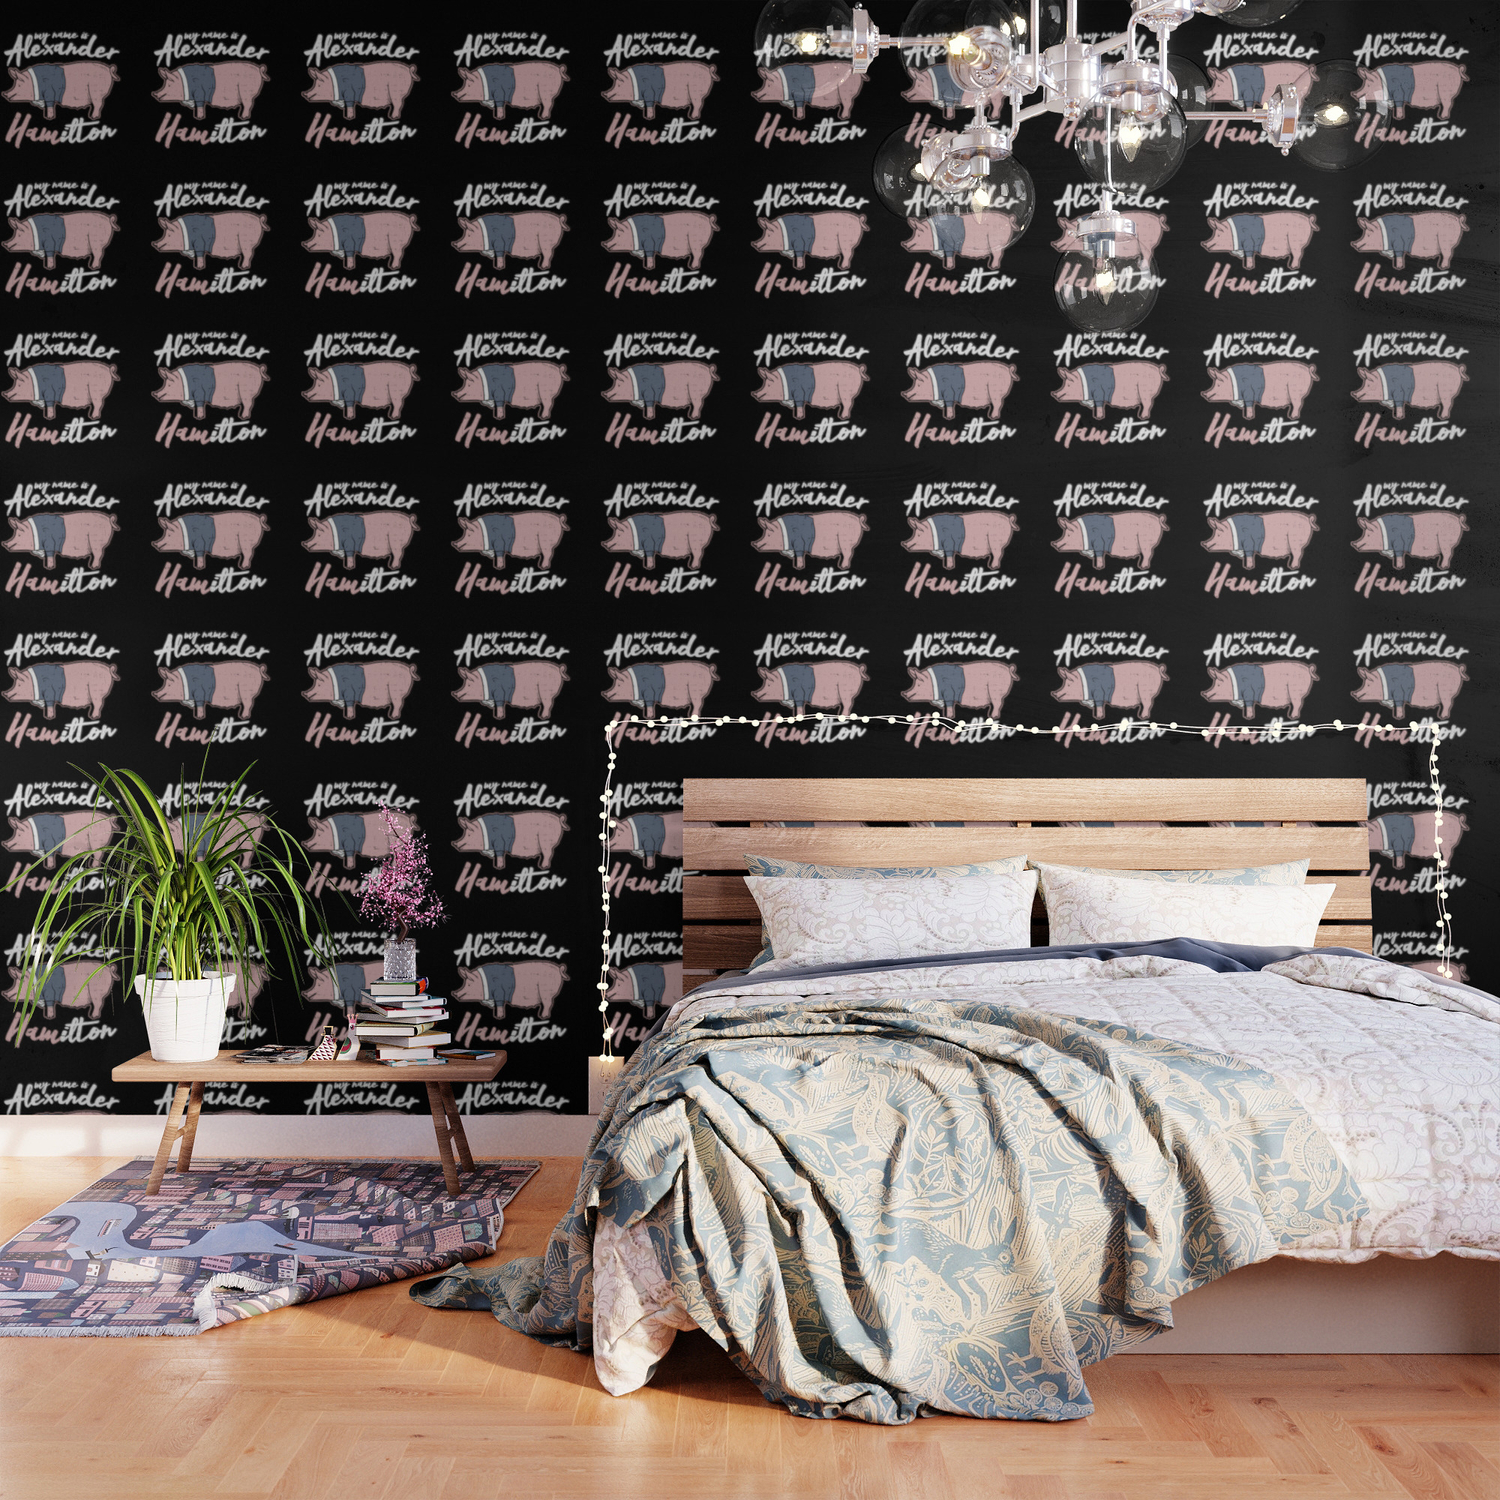 My Name Is Alexander Hamilton. - Gift Wallpaper by Monster Designs |  Society6